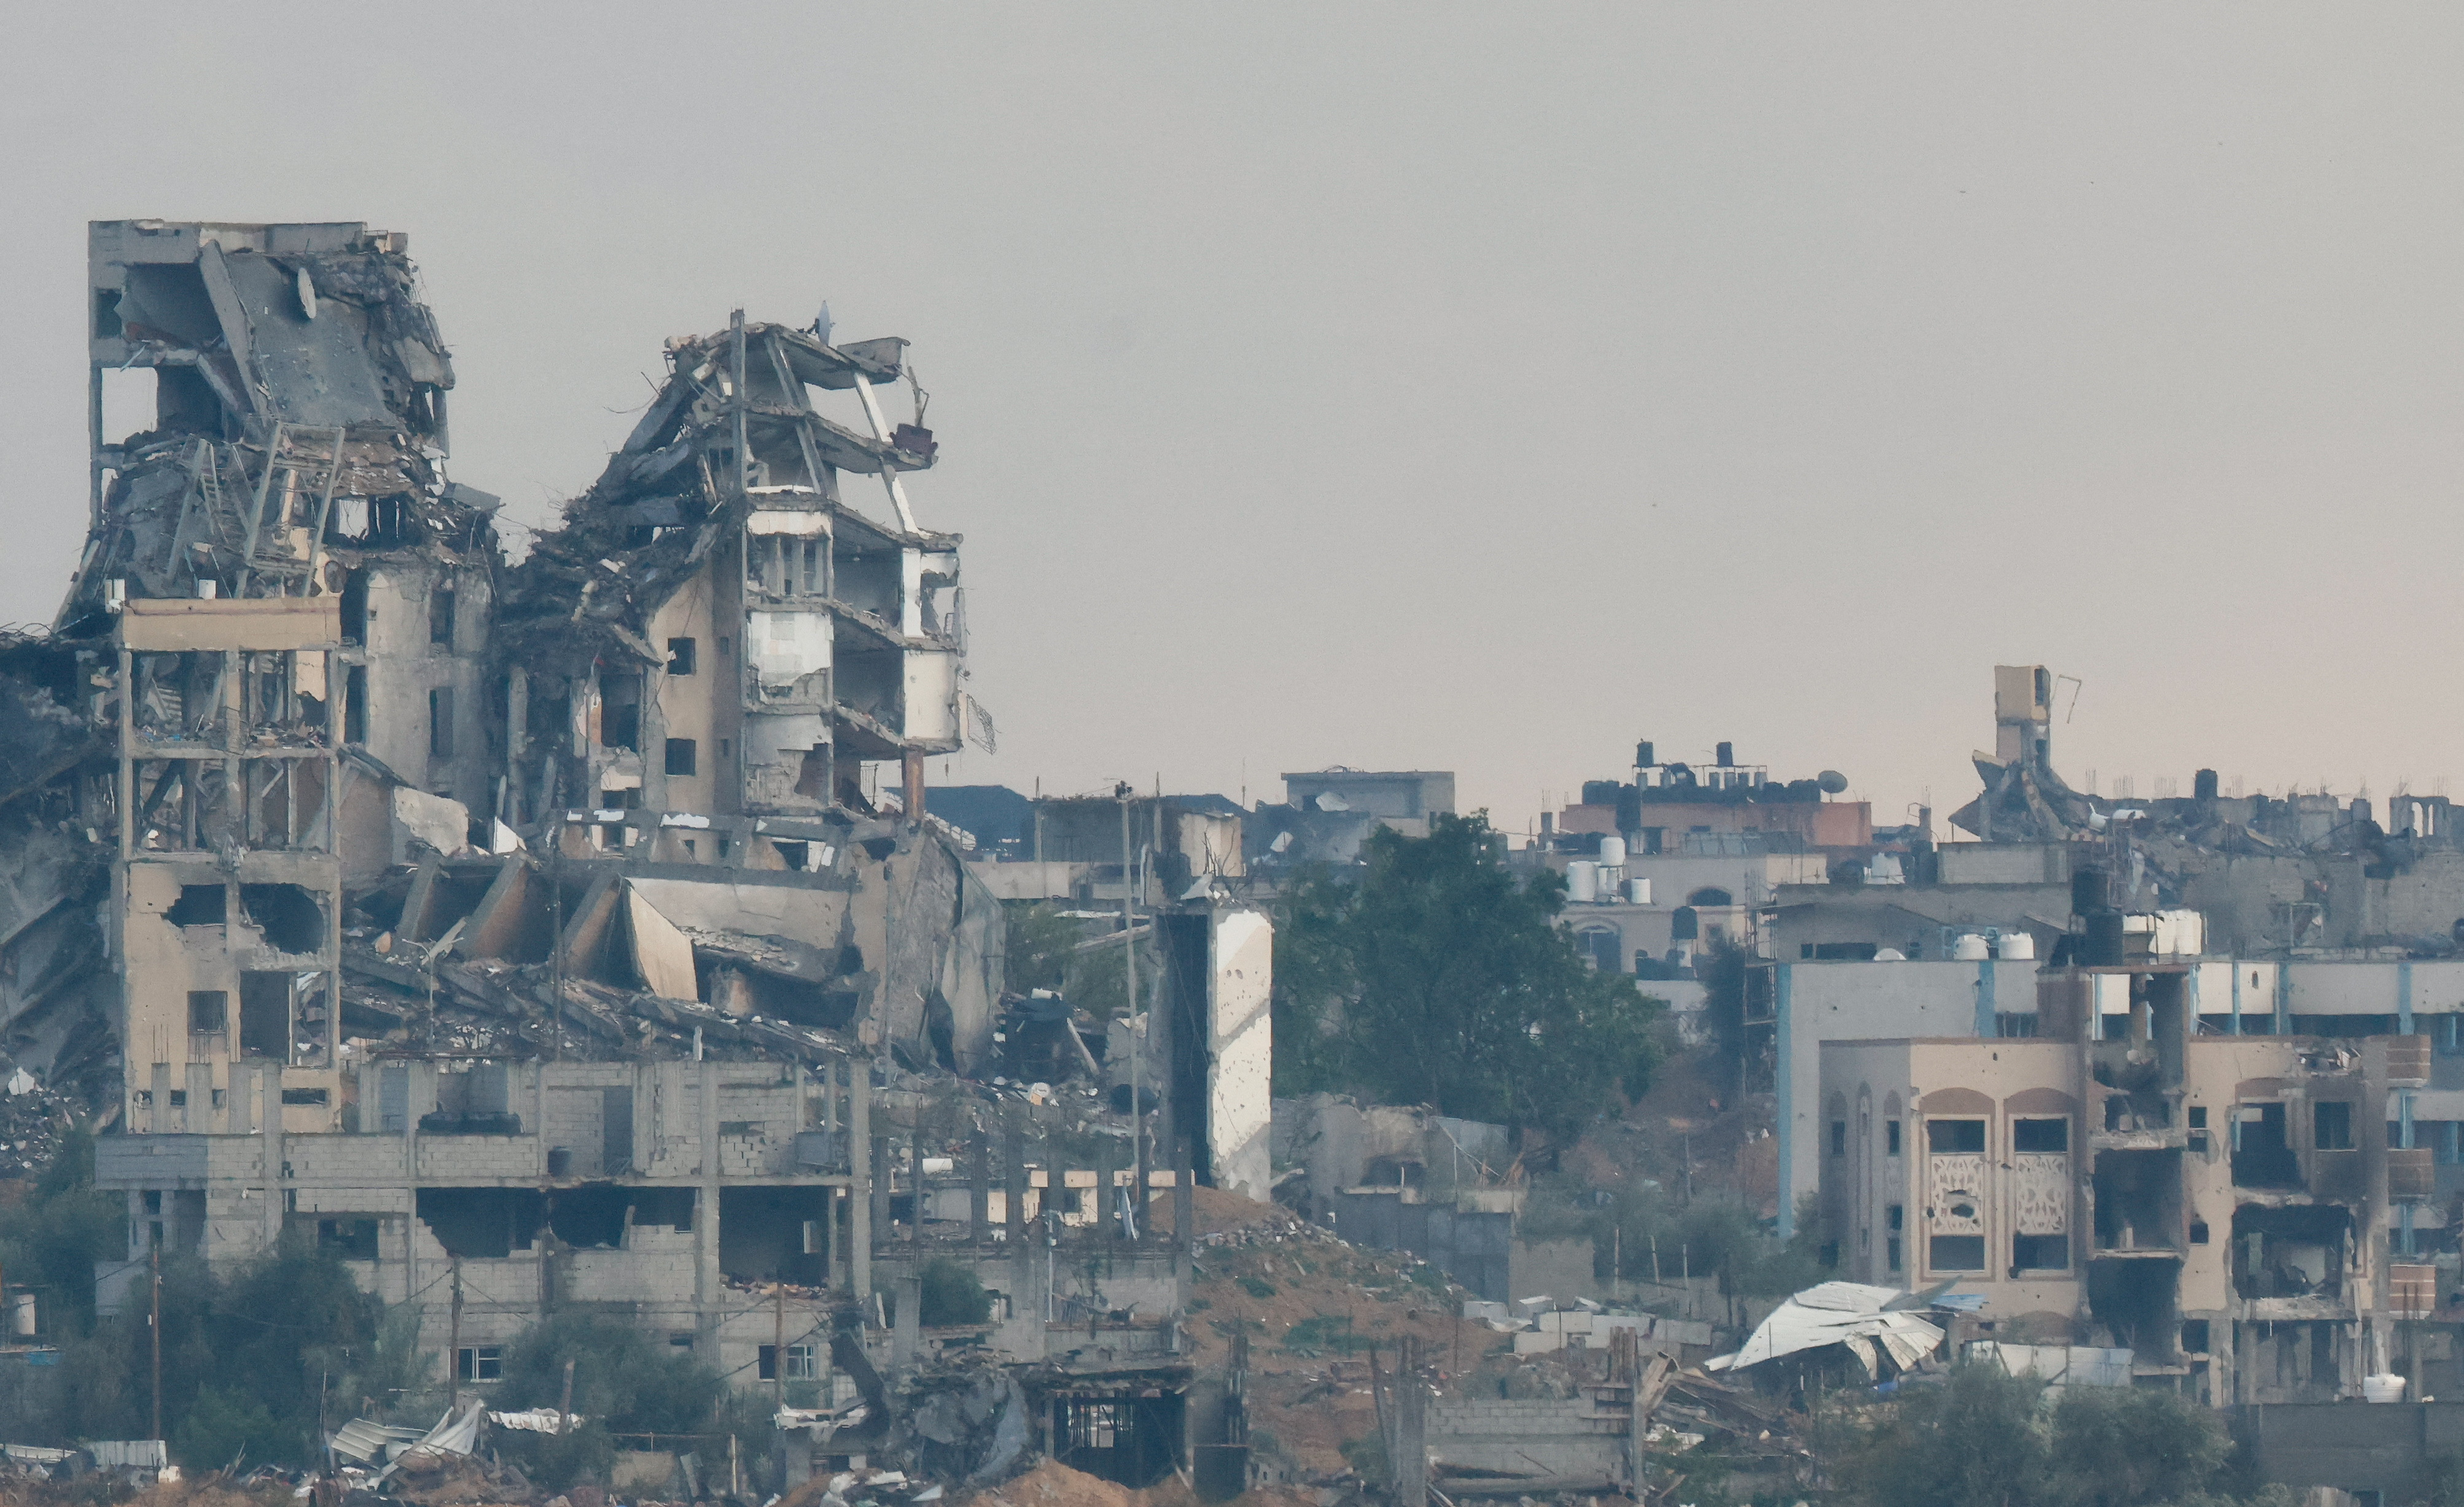 Destroyed buildings lie in ruin in the Gaza Strip, as seen from Israel